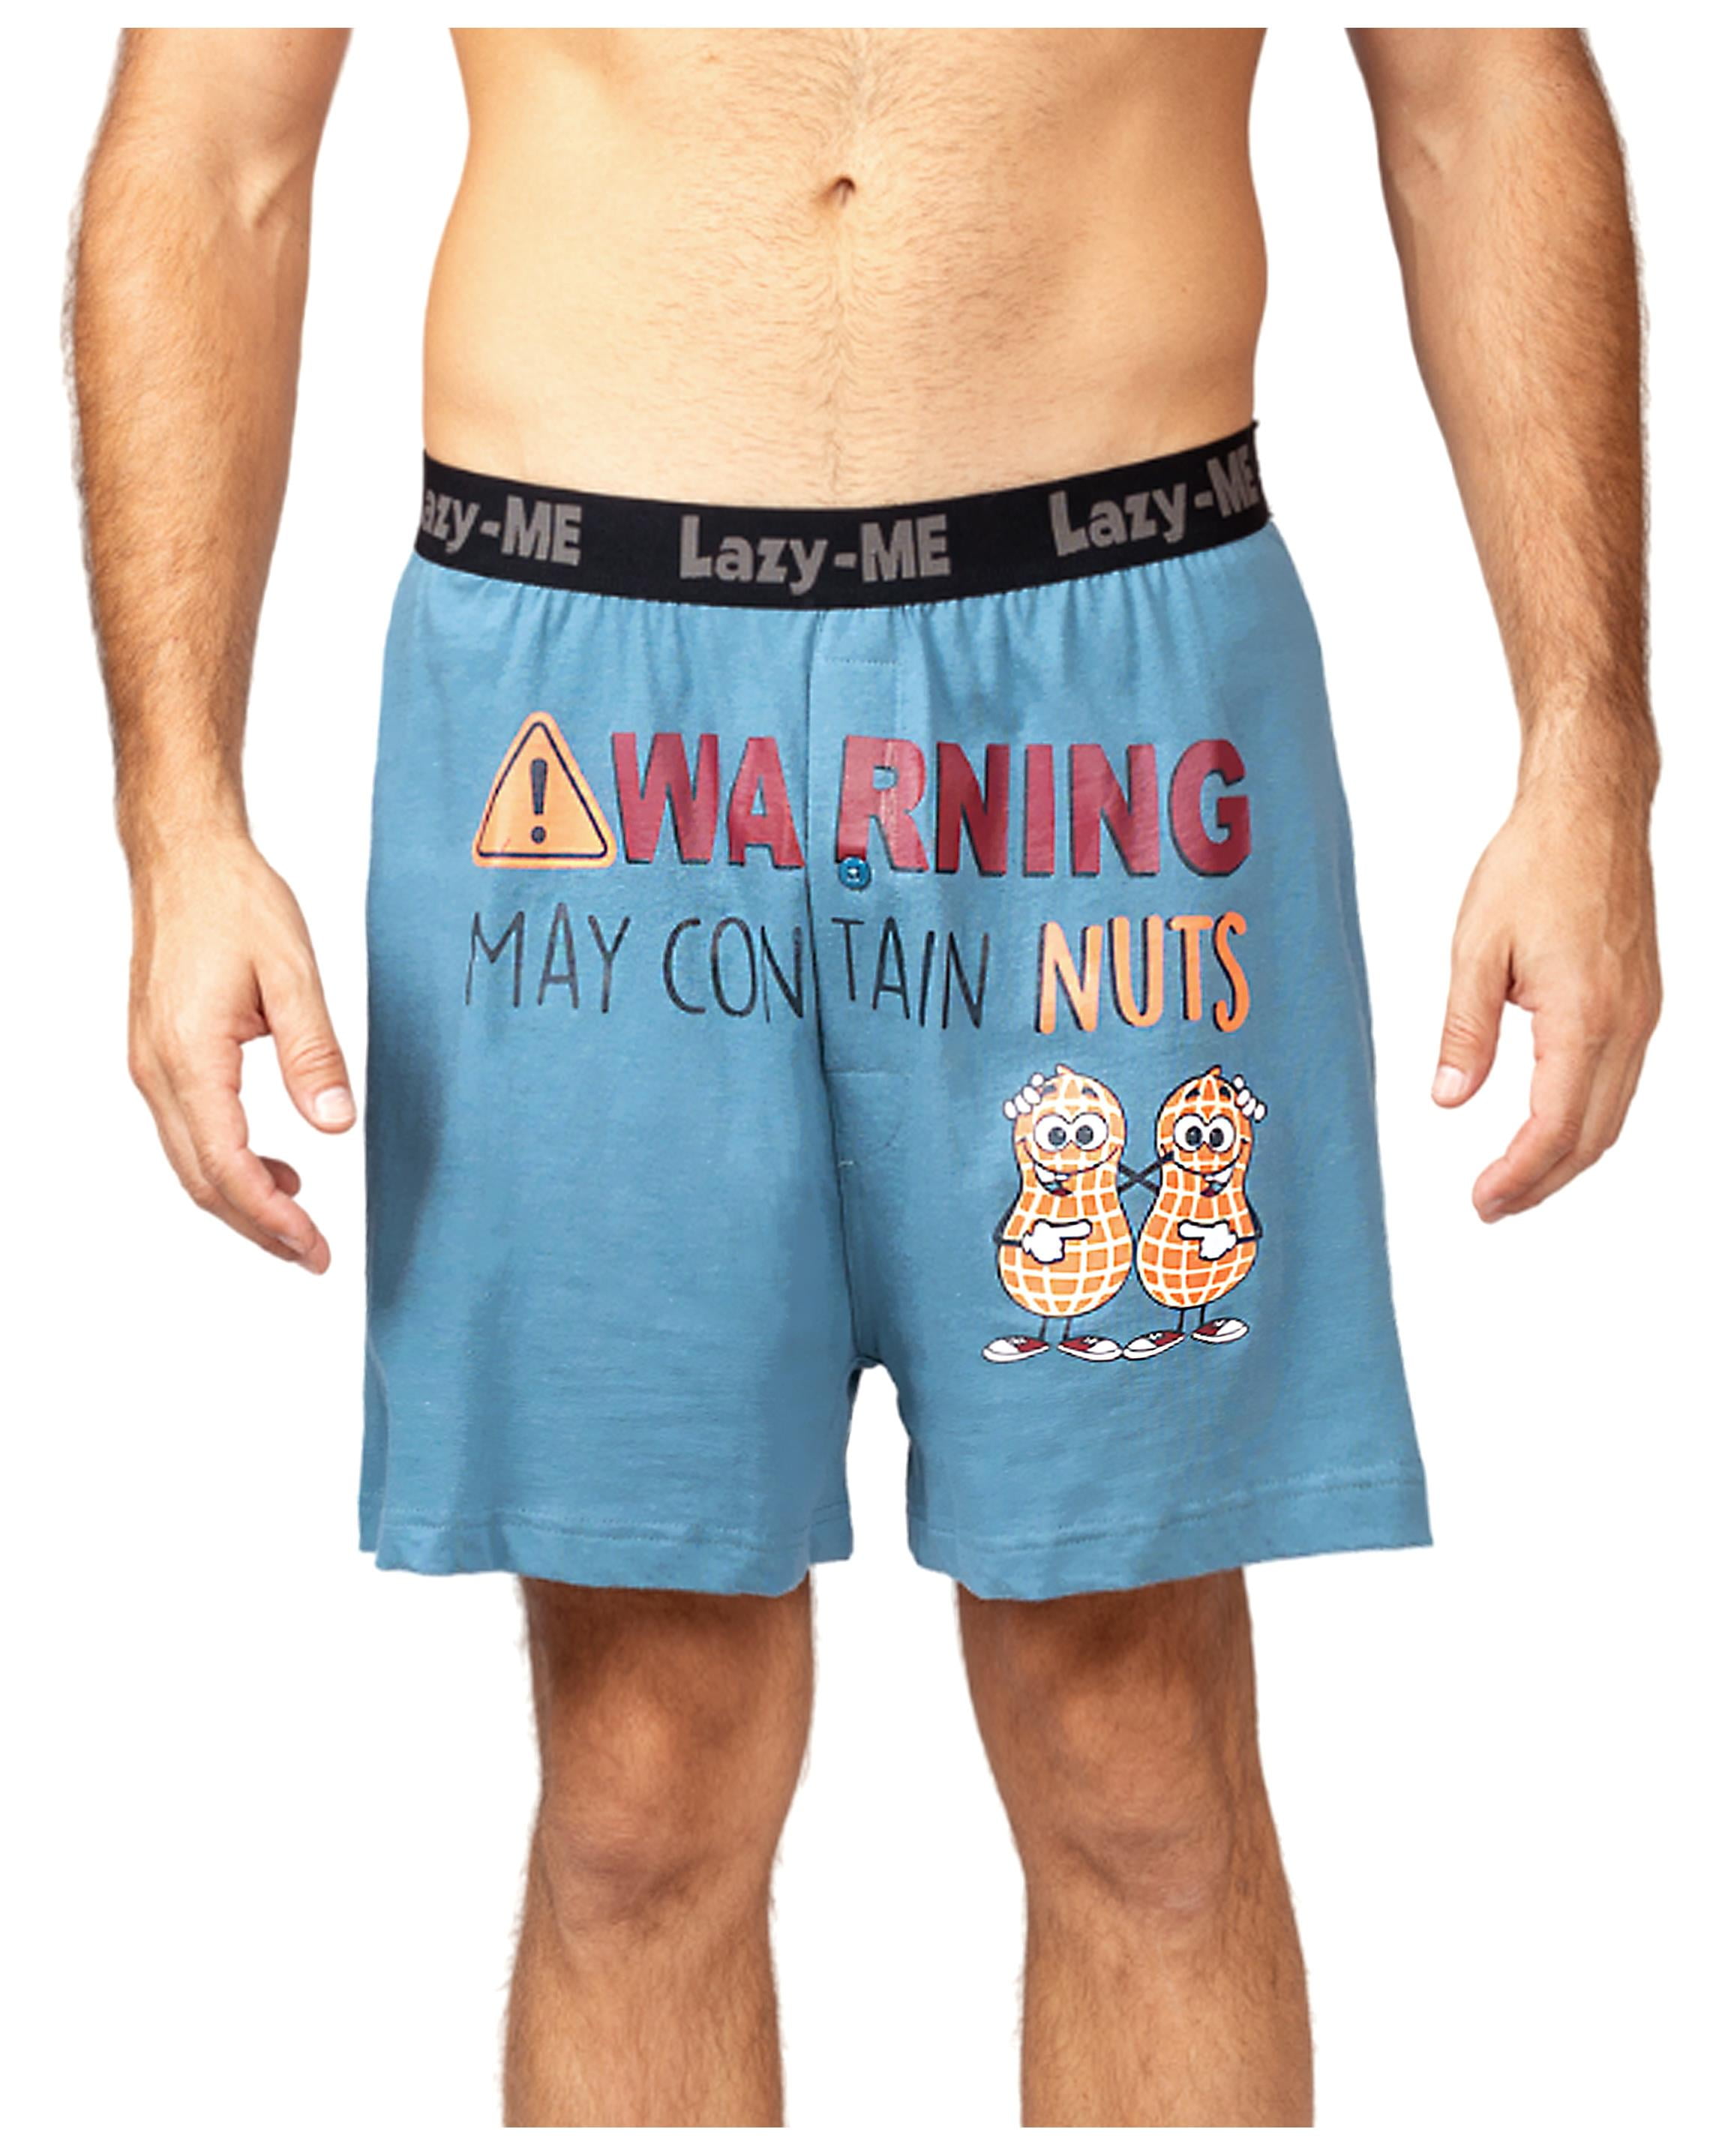 Mens Funny Boxer Shorts, Male Sizes XS-L, Squirrel, Size: 2X, Lazy Me